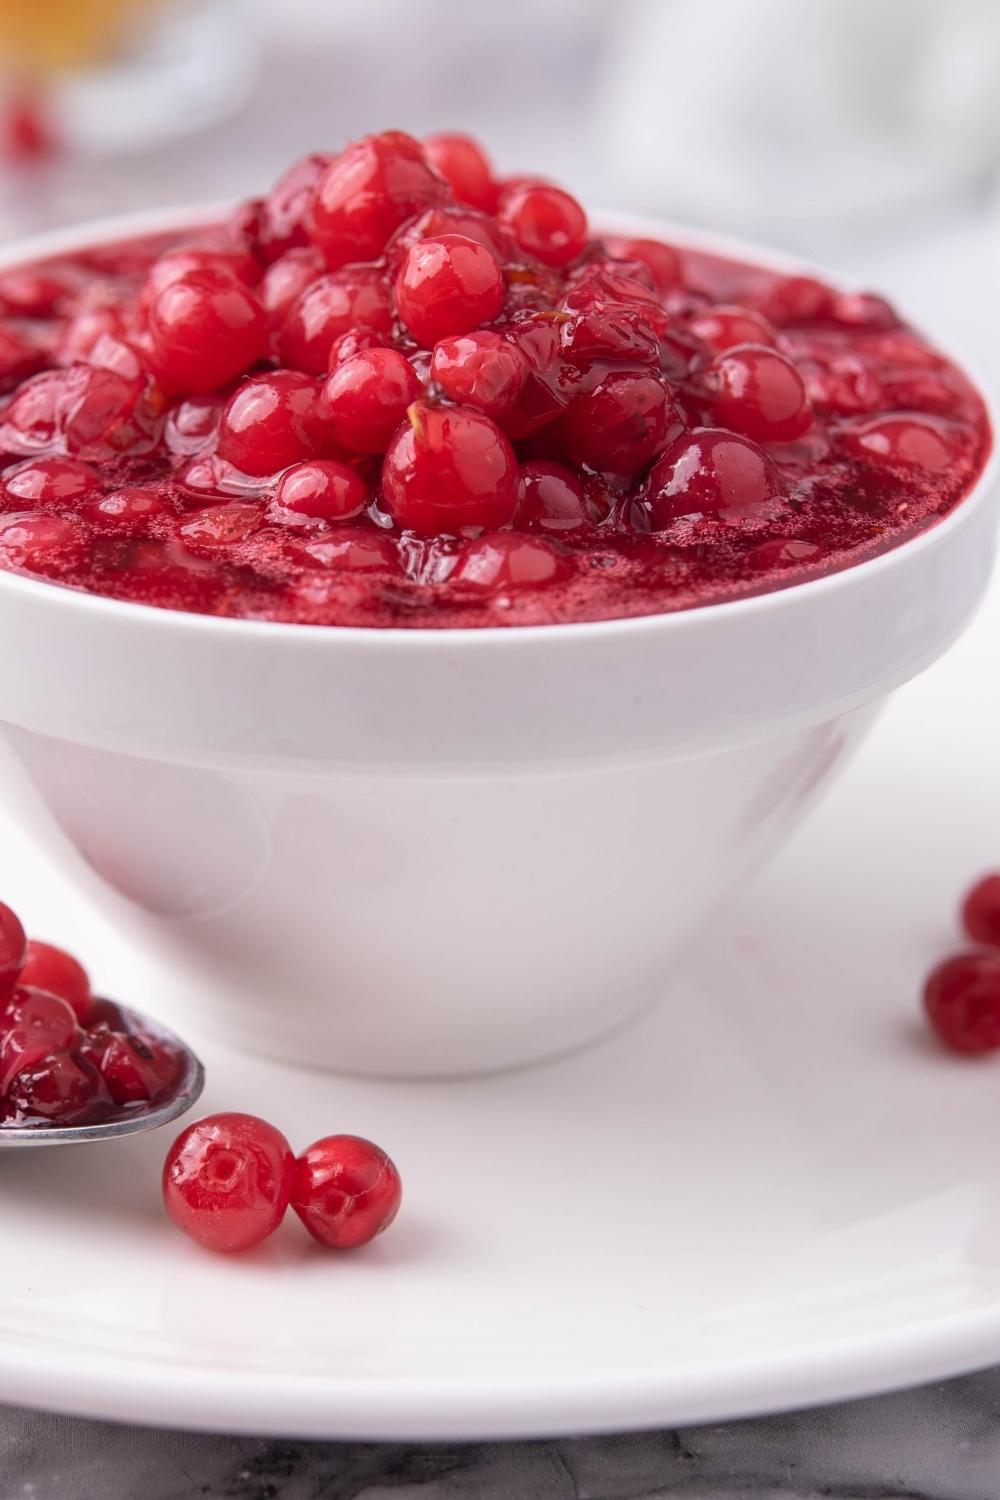 A small serving bowl with cranberry sauce served on a saucer. A heaping spoonful of cranberries sits next to the bowl on the saucer.